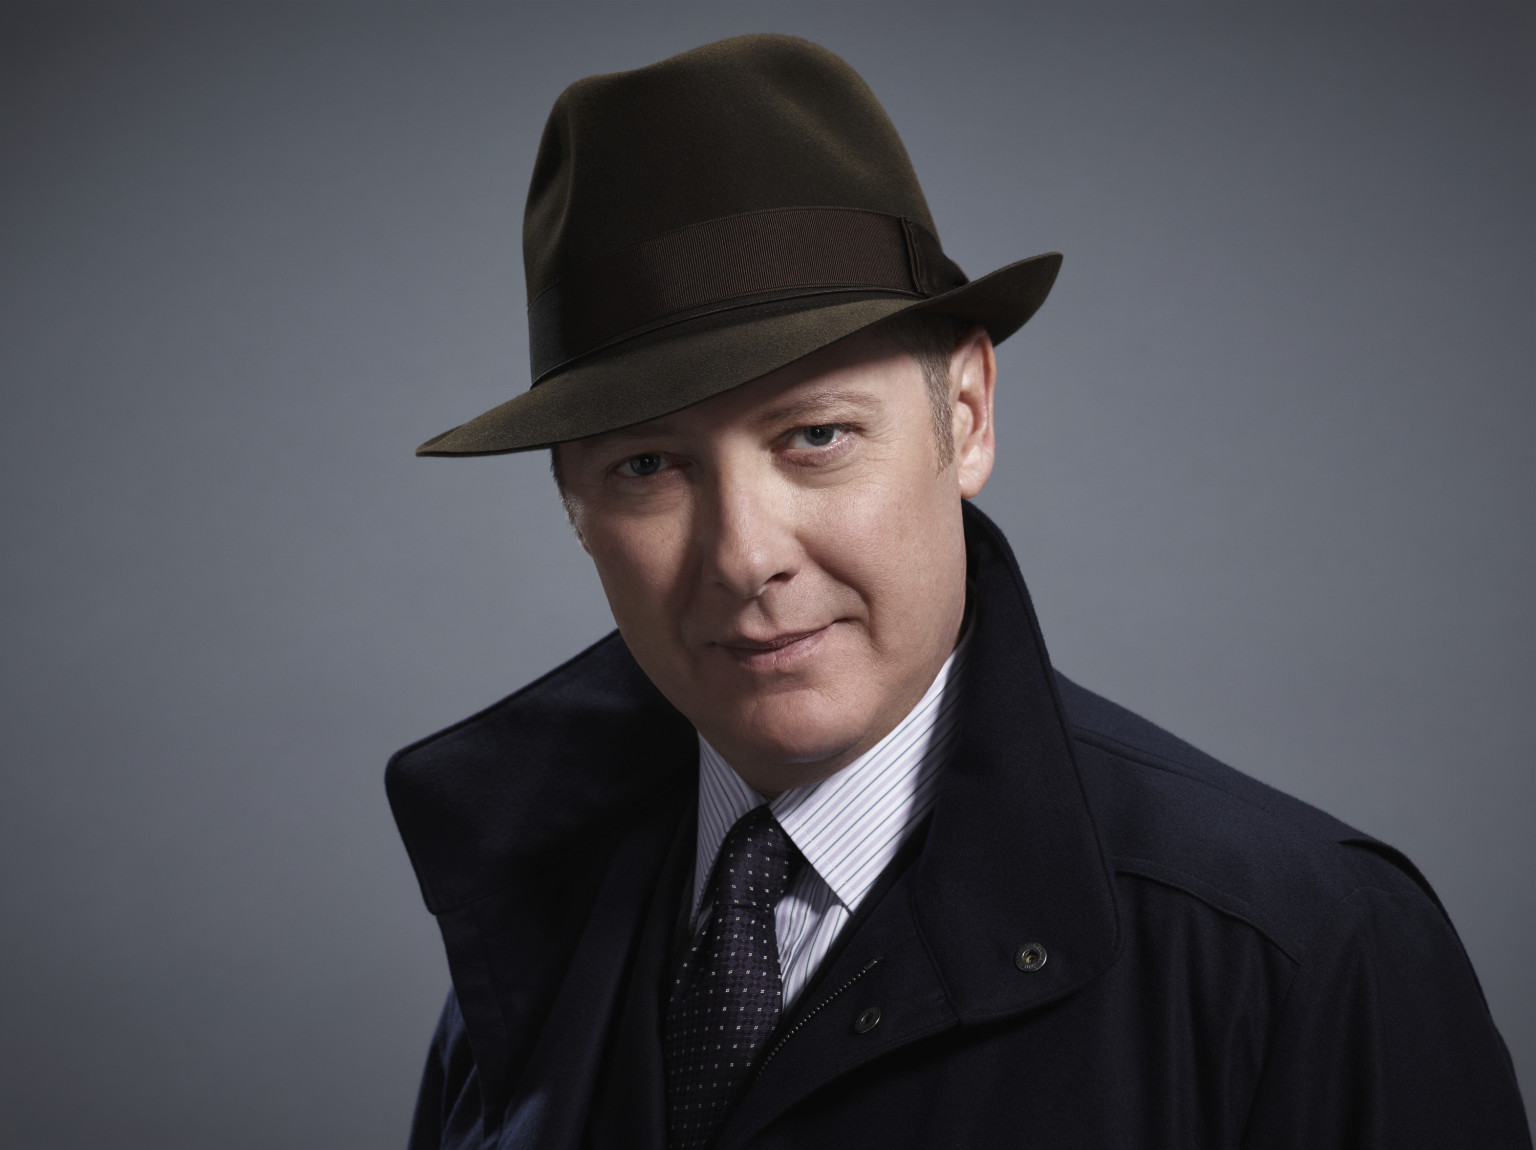 #39 The Blacklist #39 On NBC: Exclusive First Look At James Spader #39 s Intense